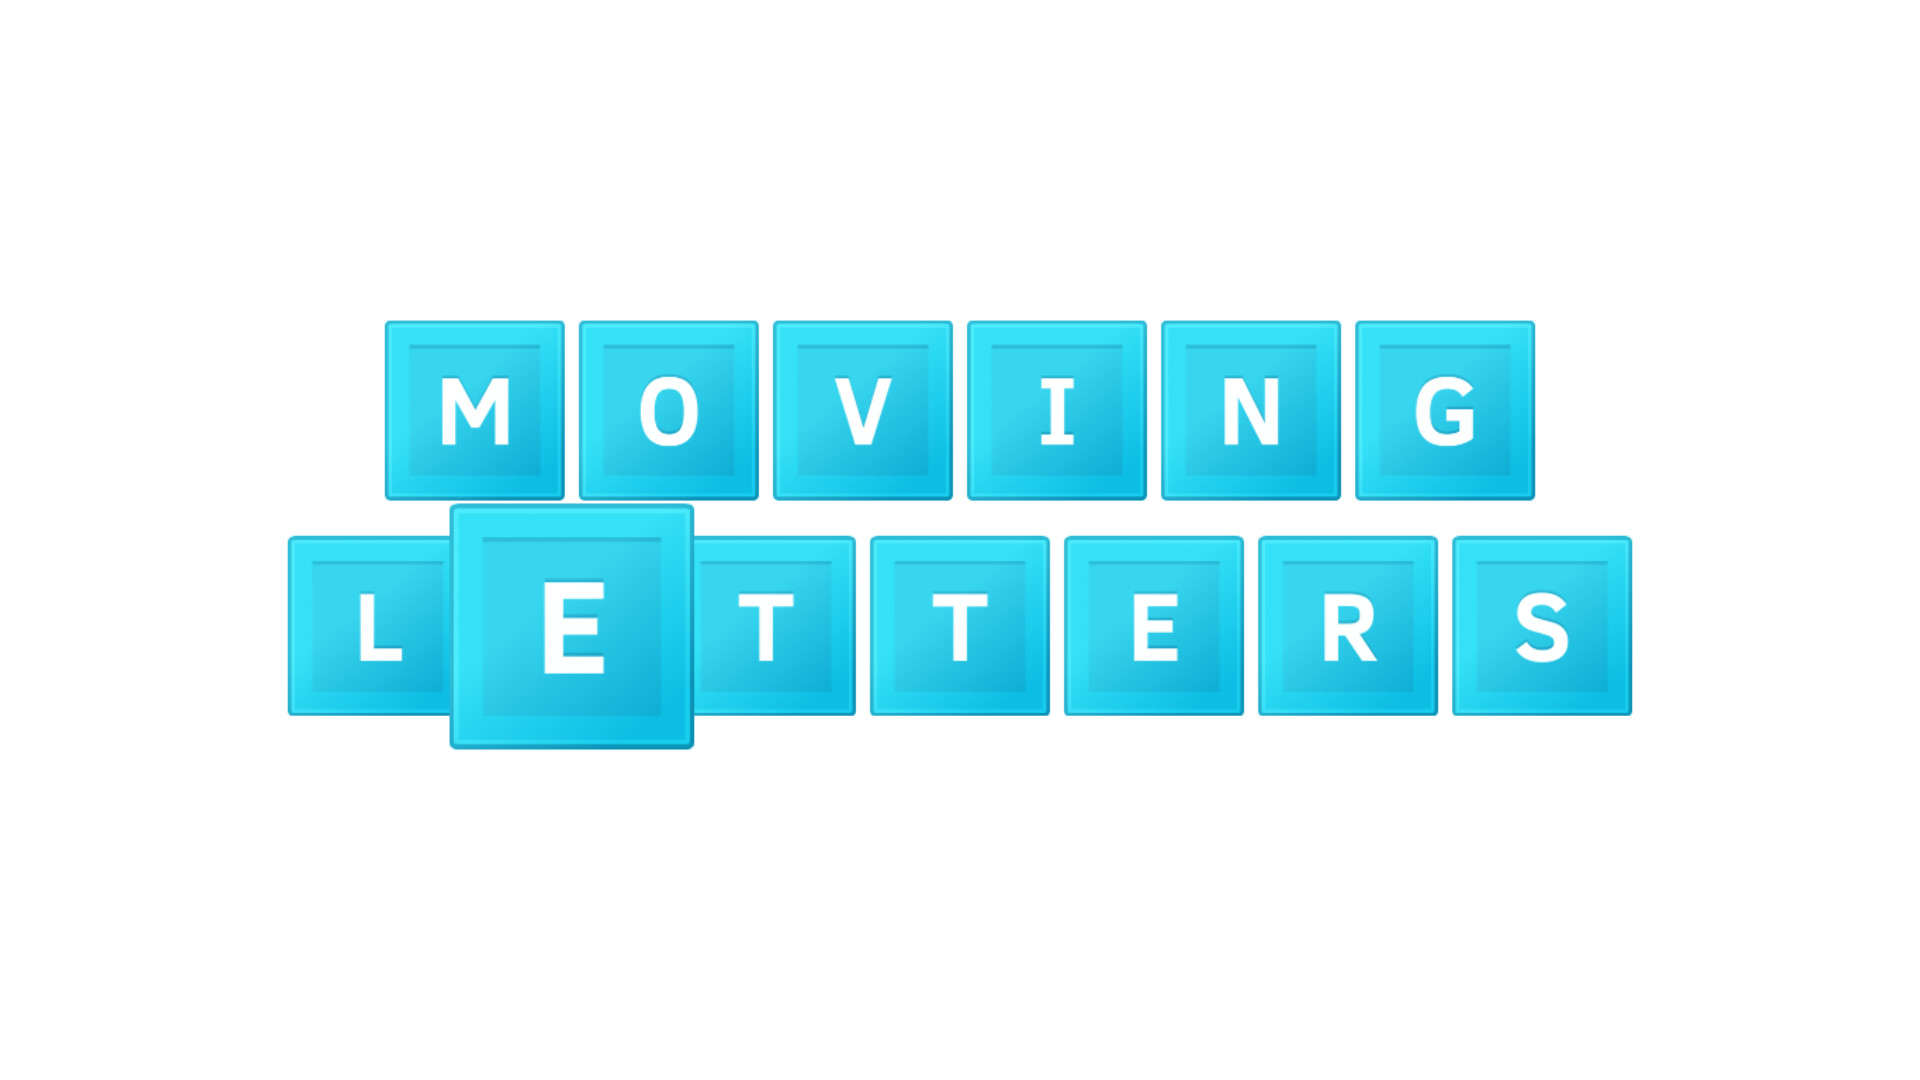 Moving Letters screenshot